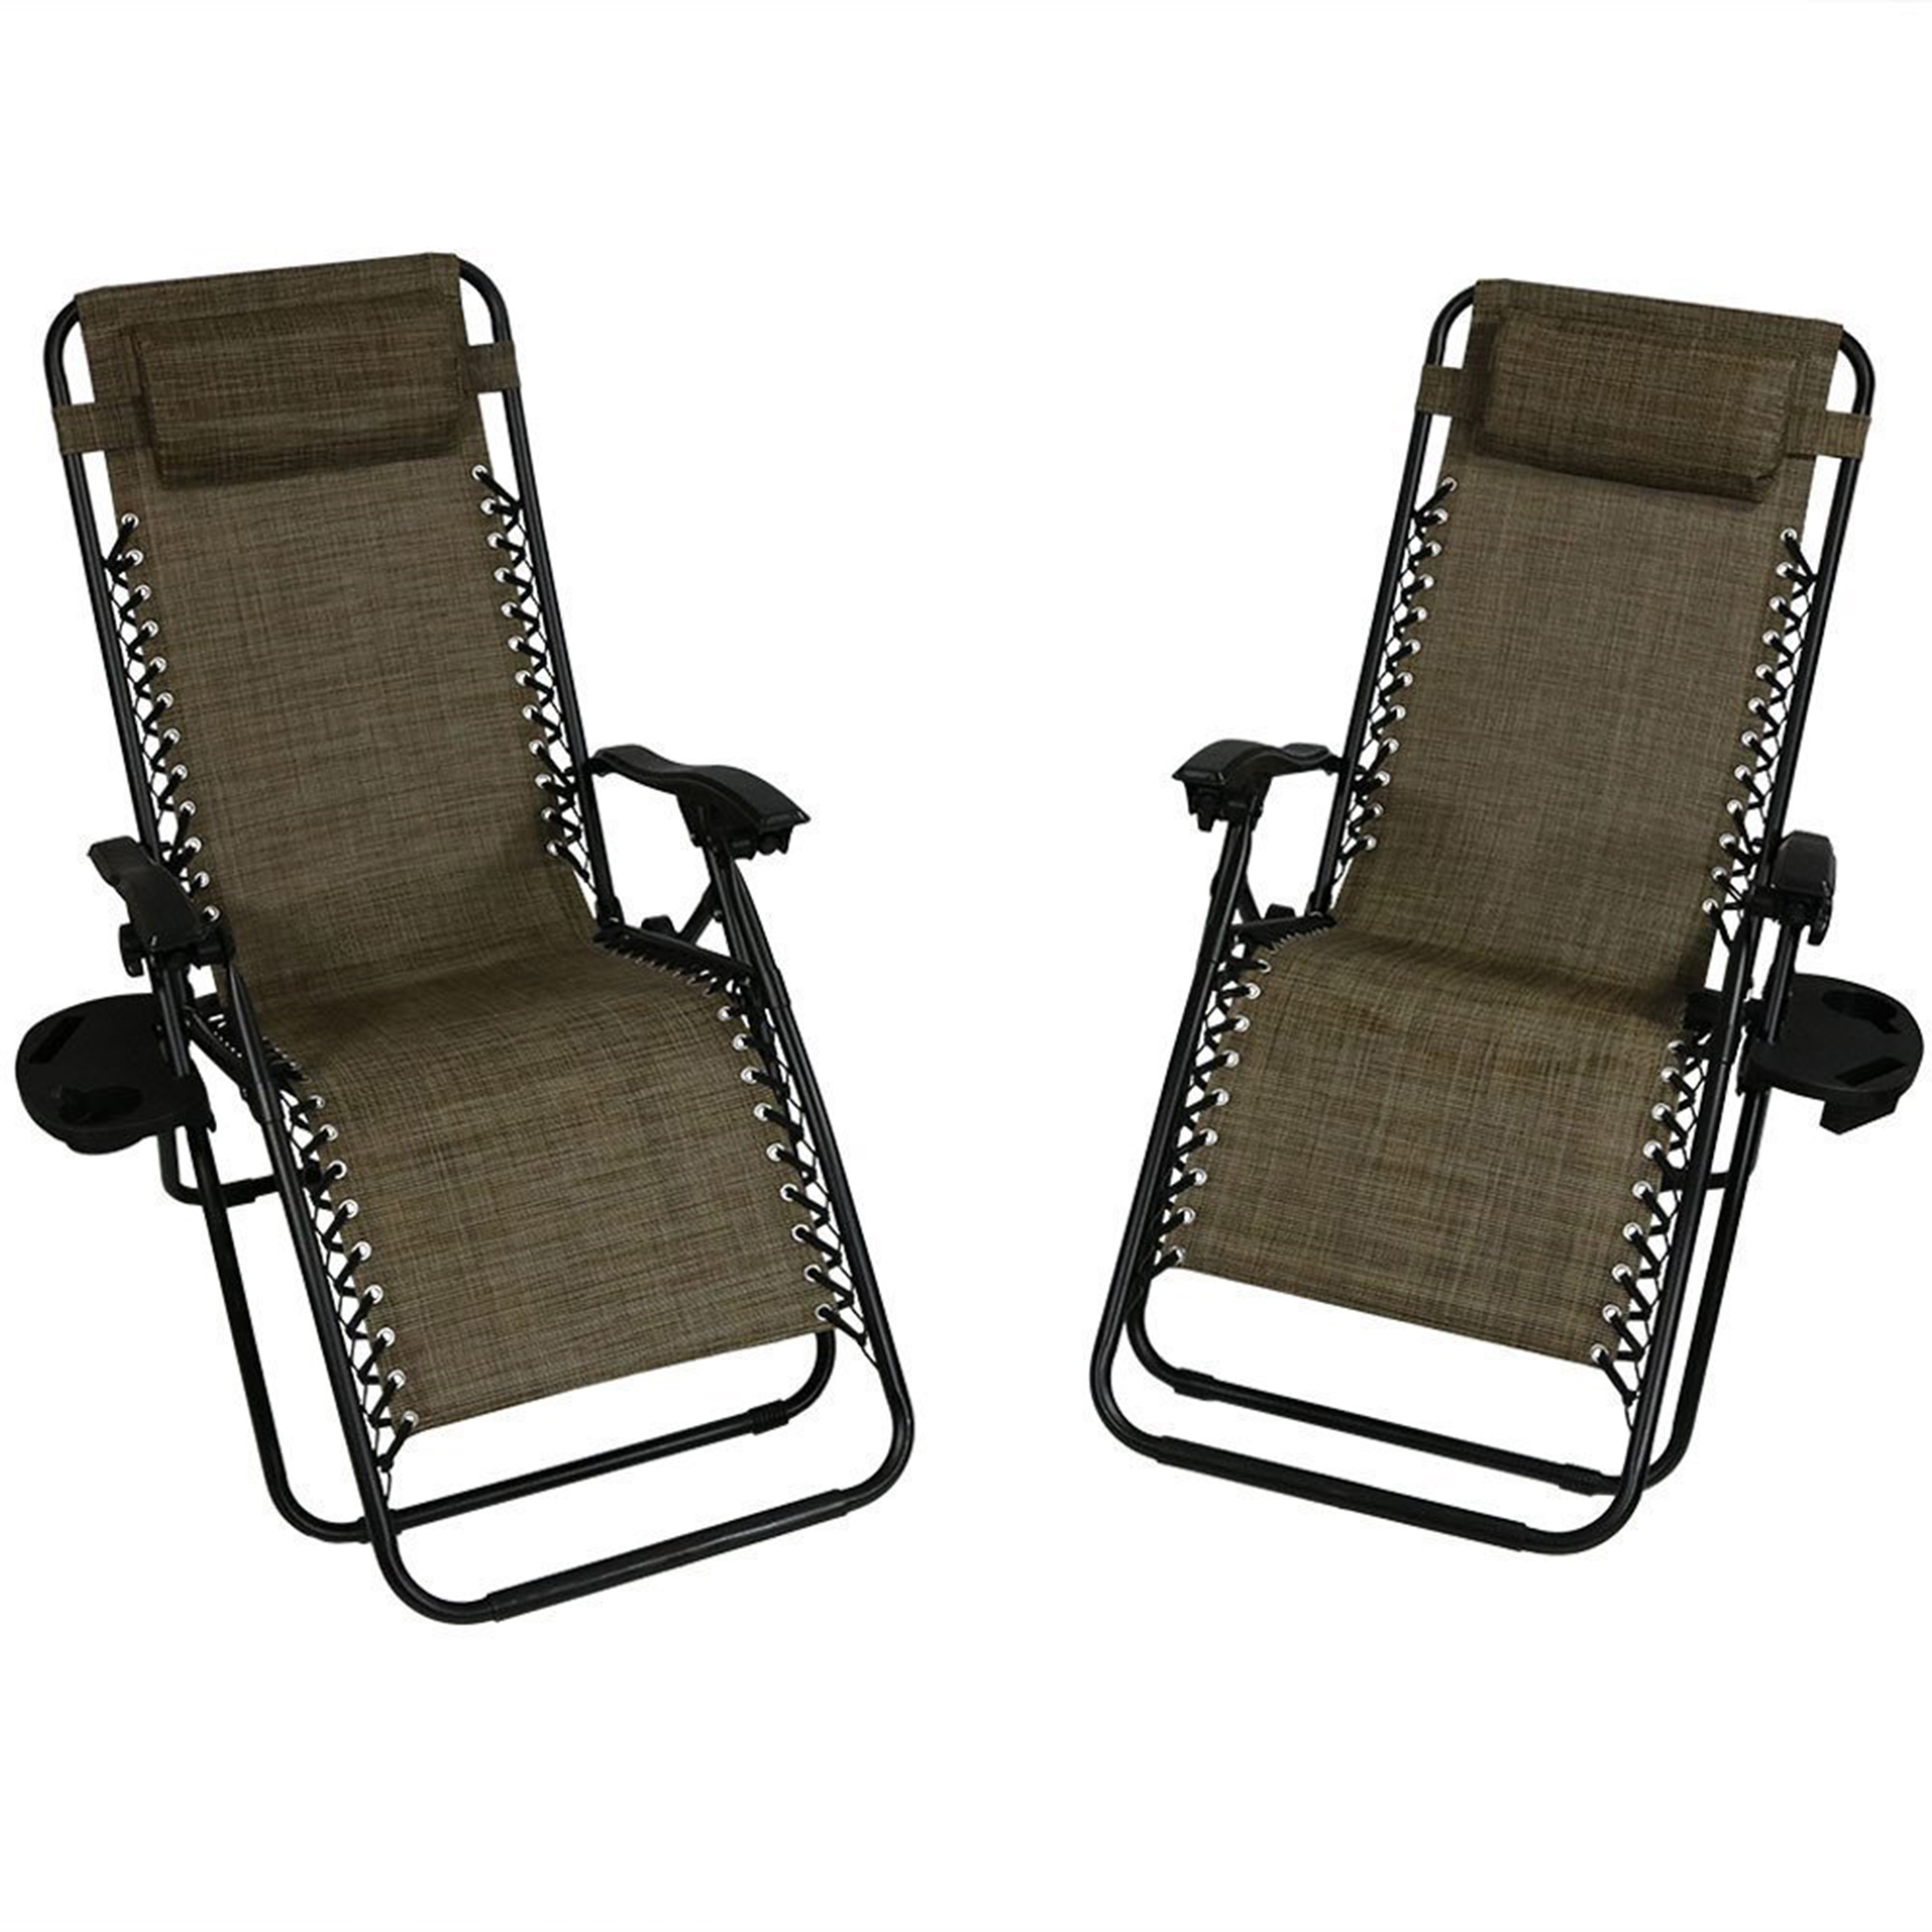 XL Zero Gravity Chair with Cup Holder - Brown - Set of 2